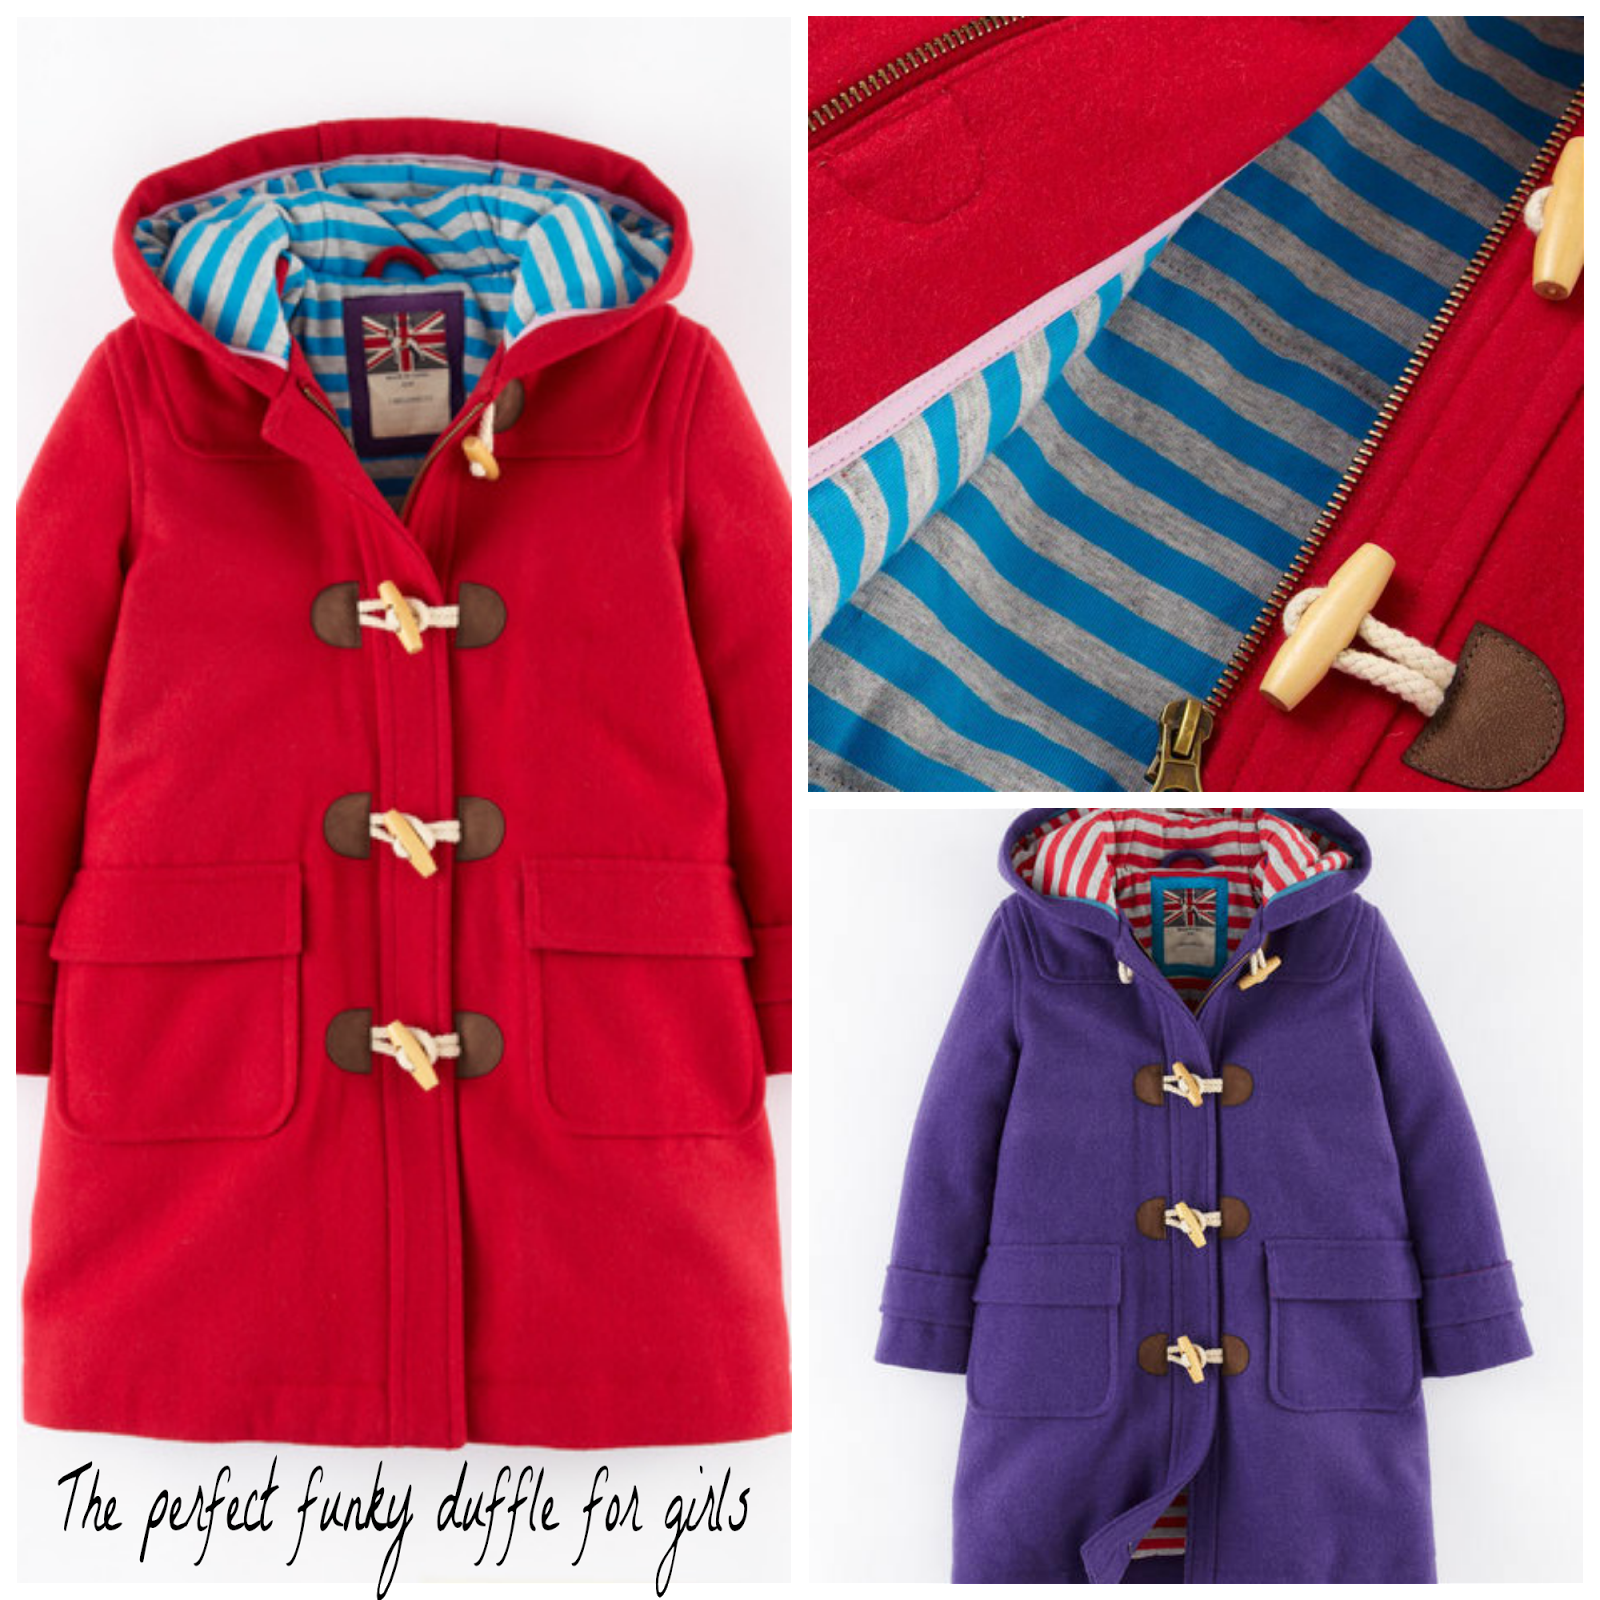 The Perfect Bright Winter Duffle Coat for Girls | Evans-Crittens ...